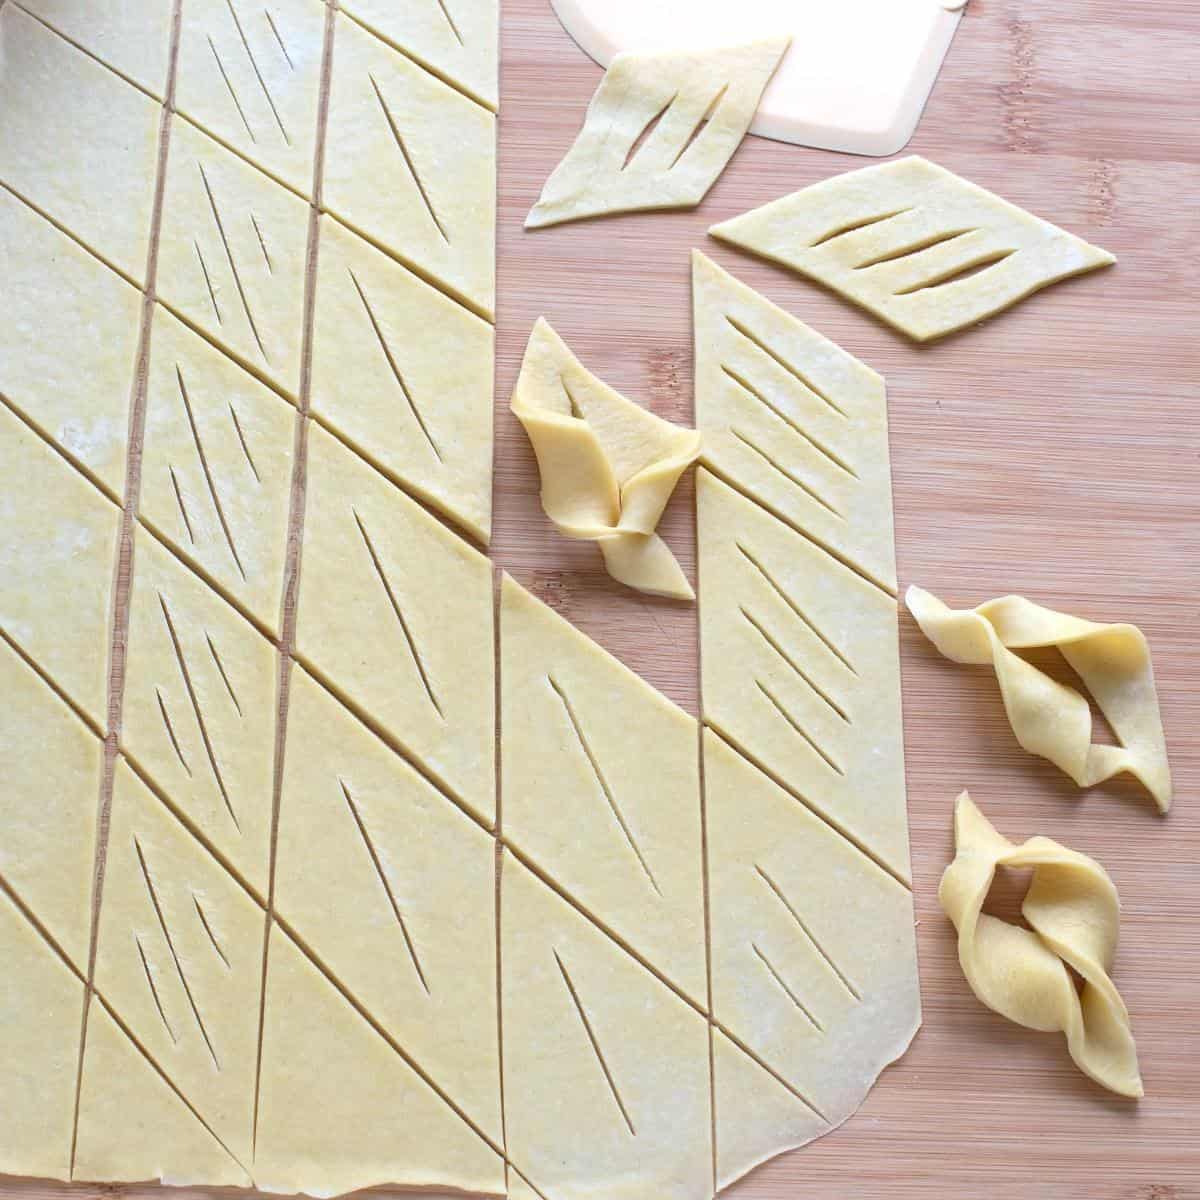 Cutting and forming various shapes of thinly rolled dough for bozi milosti.